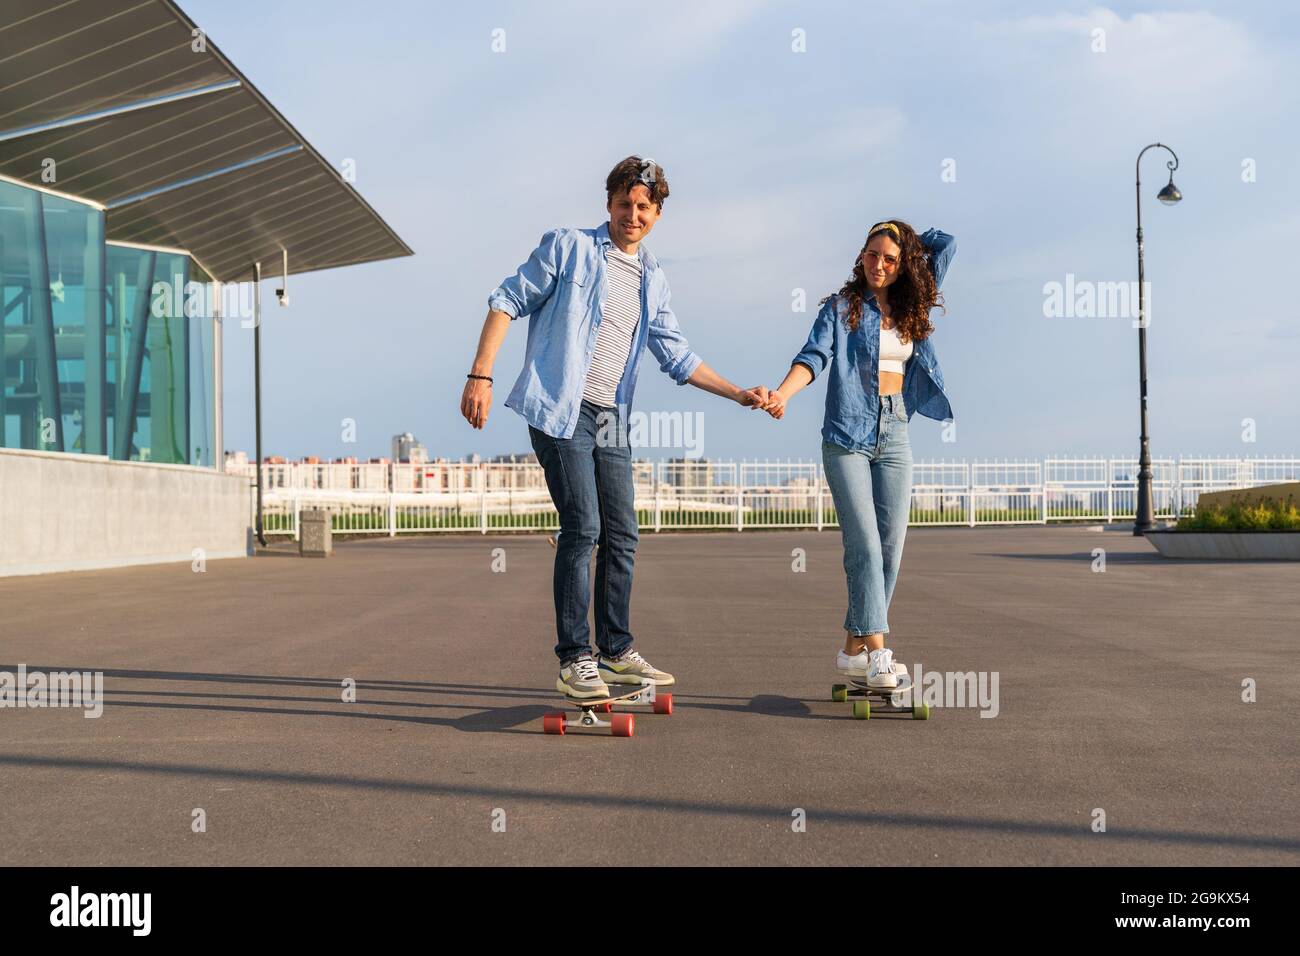 Young adult riding longboard on summer city street. Hipsters couple on skateboards in urban area Stock Photo